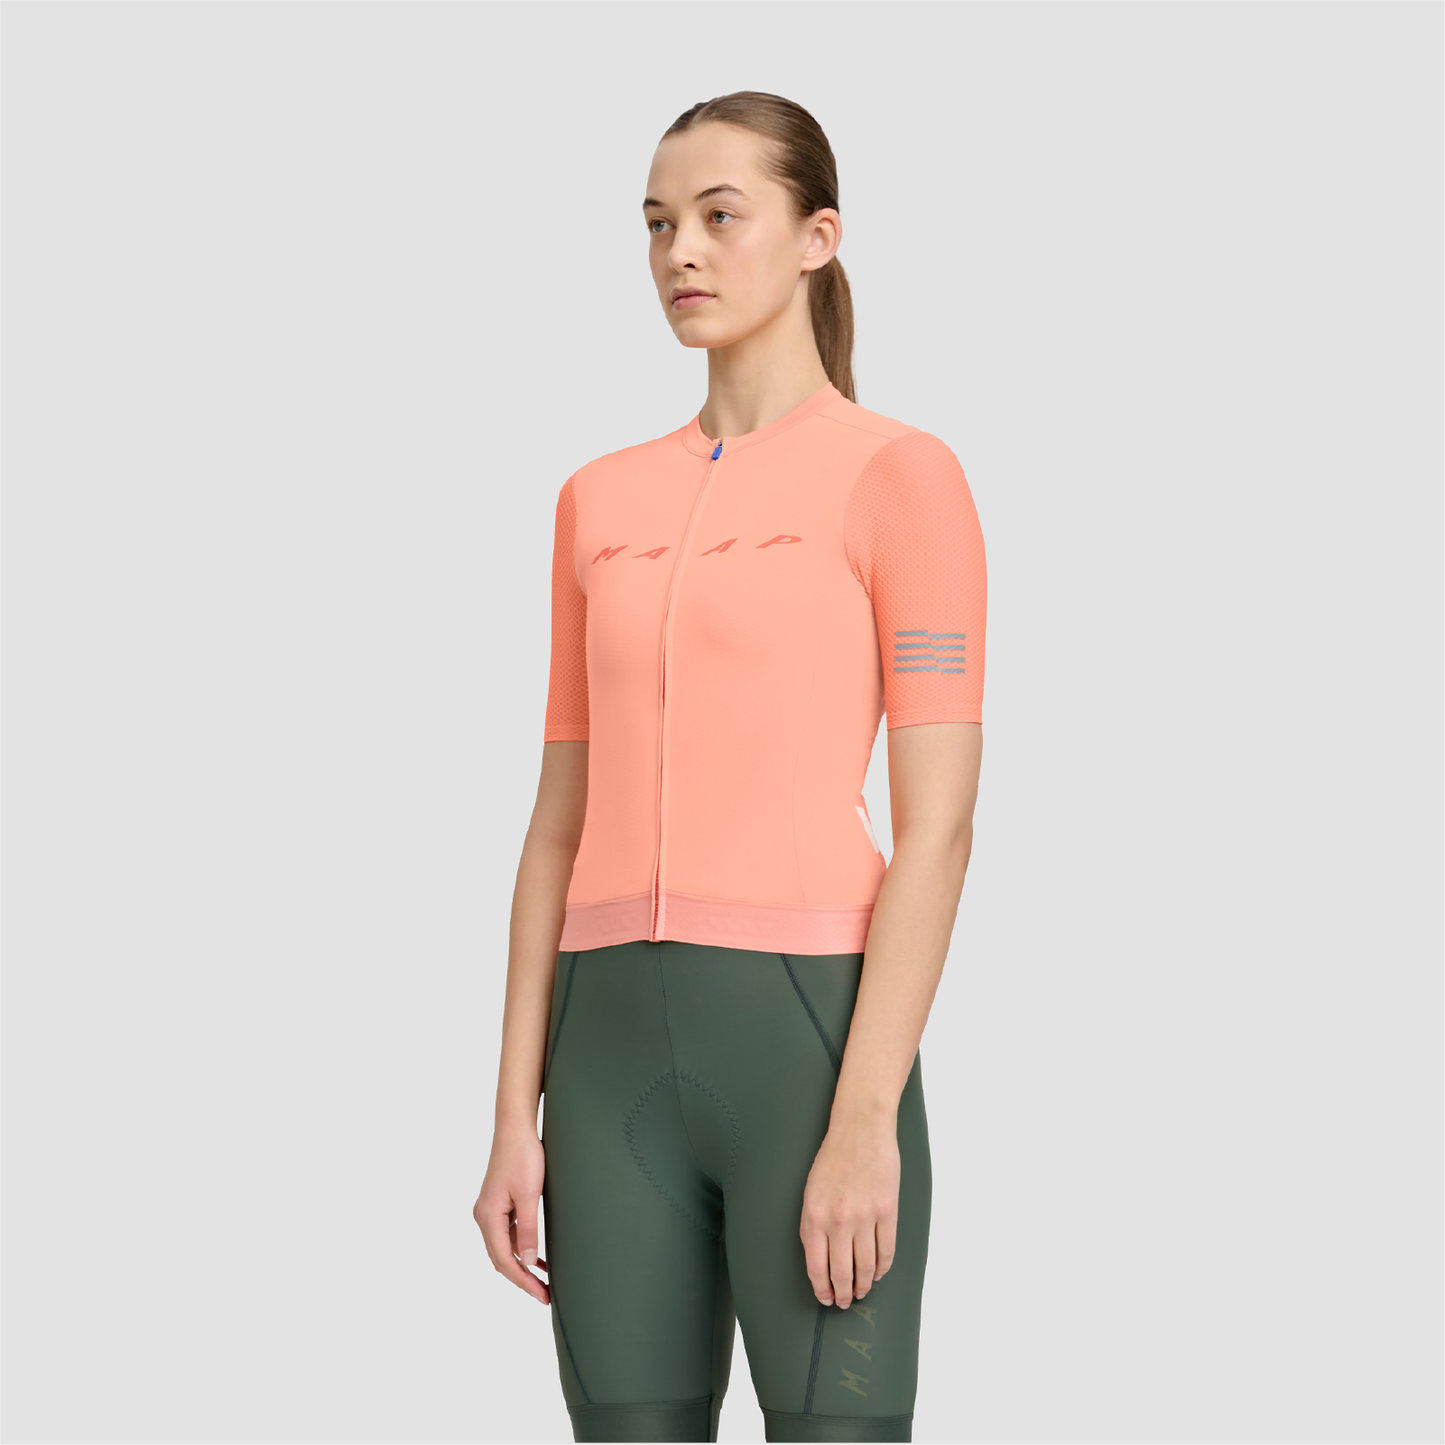 Women's Evade Pro Base Jersey Light Coral